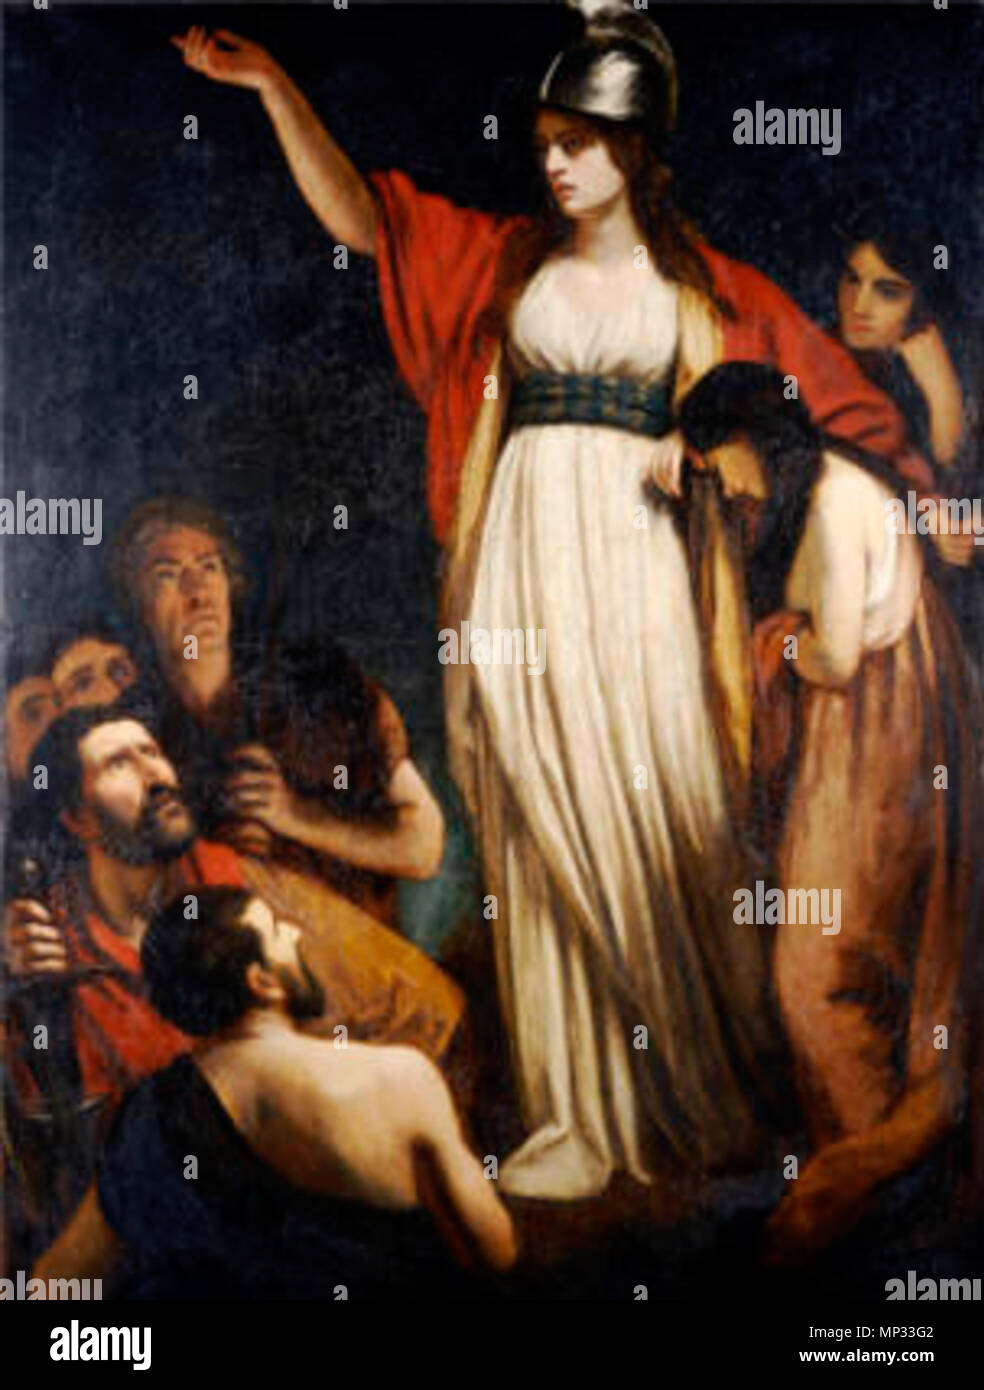 Boadicea Haranguing The Britons.  John Opie, R.A. (1761-1807). Oil On Canvas. ENG151196034  01 1035 Queen Boudica by John Opie Stock Photo